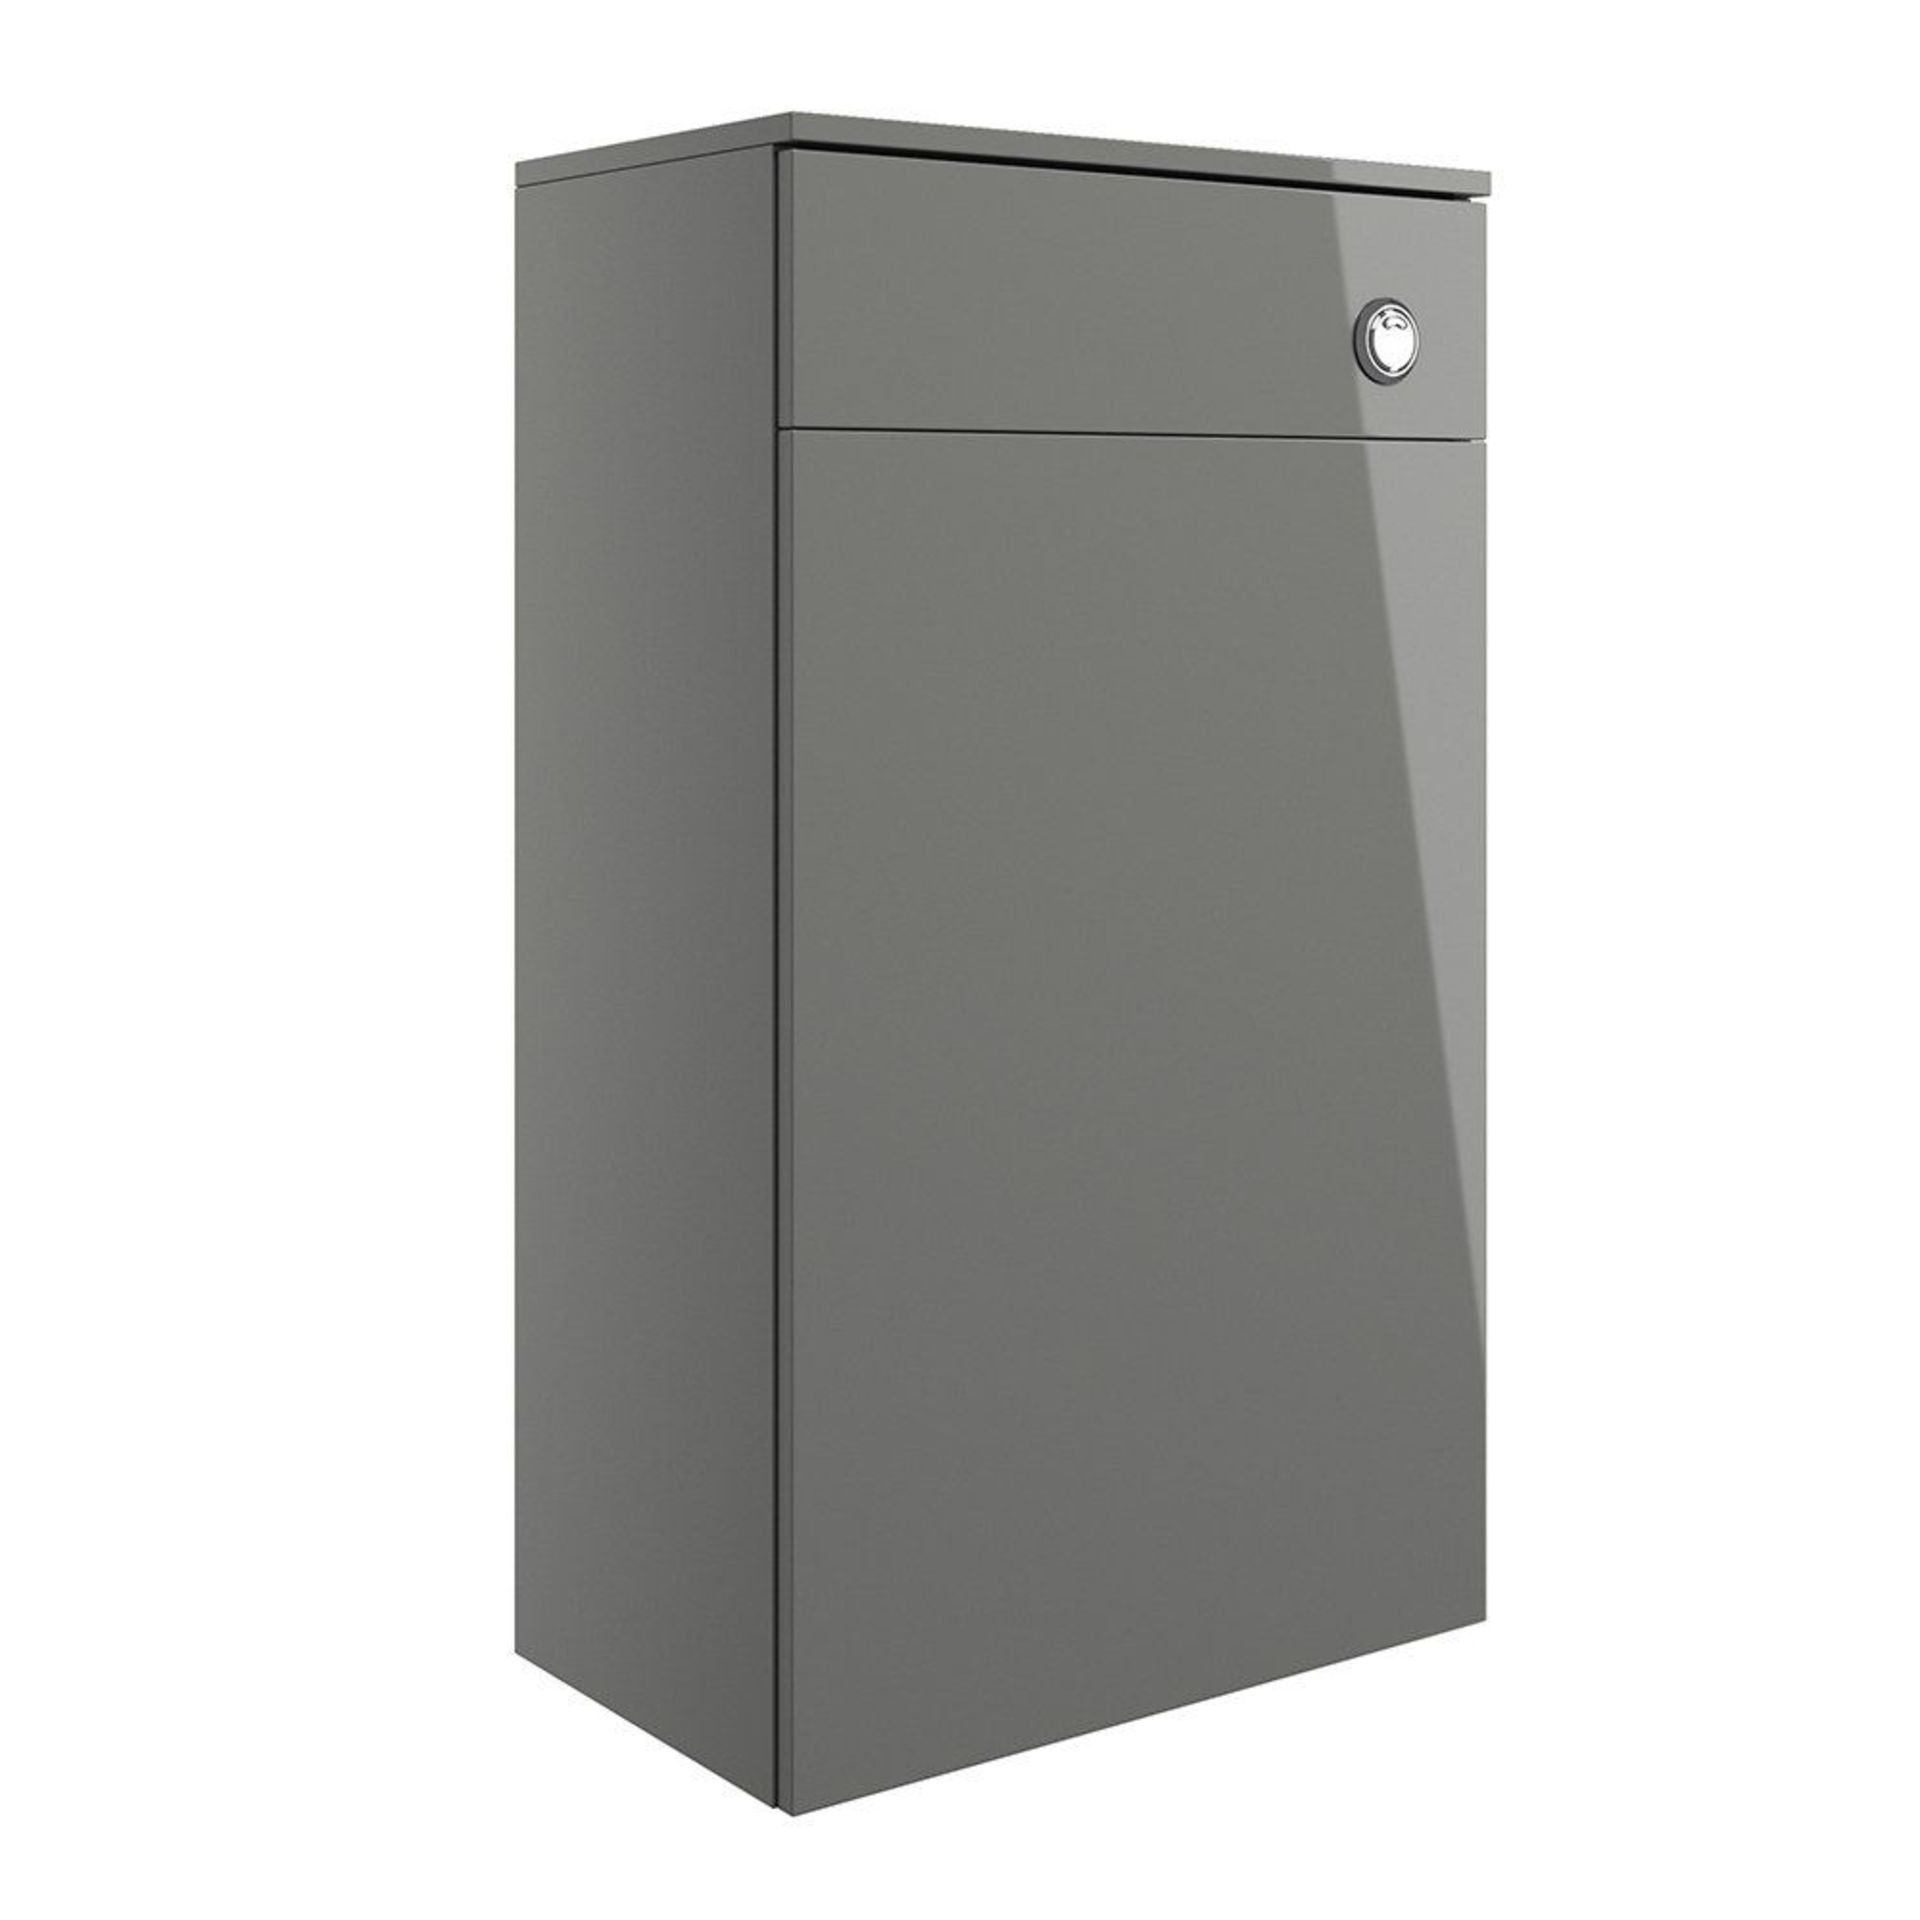 (DT67) NEW & BOXED 500mm Floor Standing WC Unit - Grey Gloss. RRP £113.14. Front fascias clip